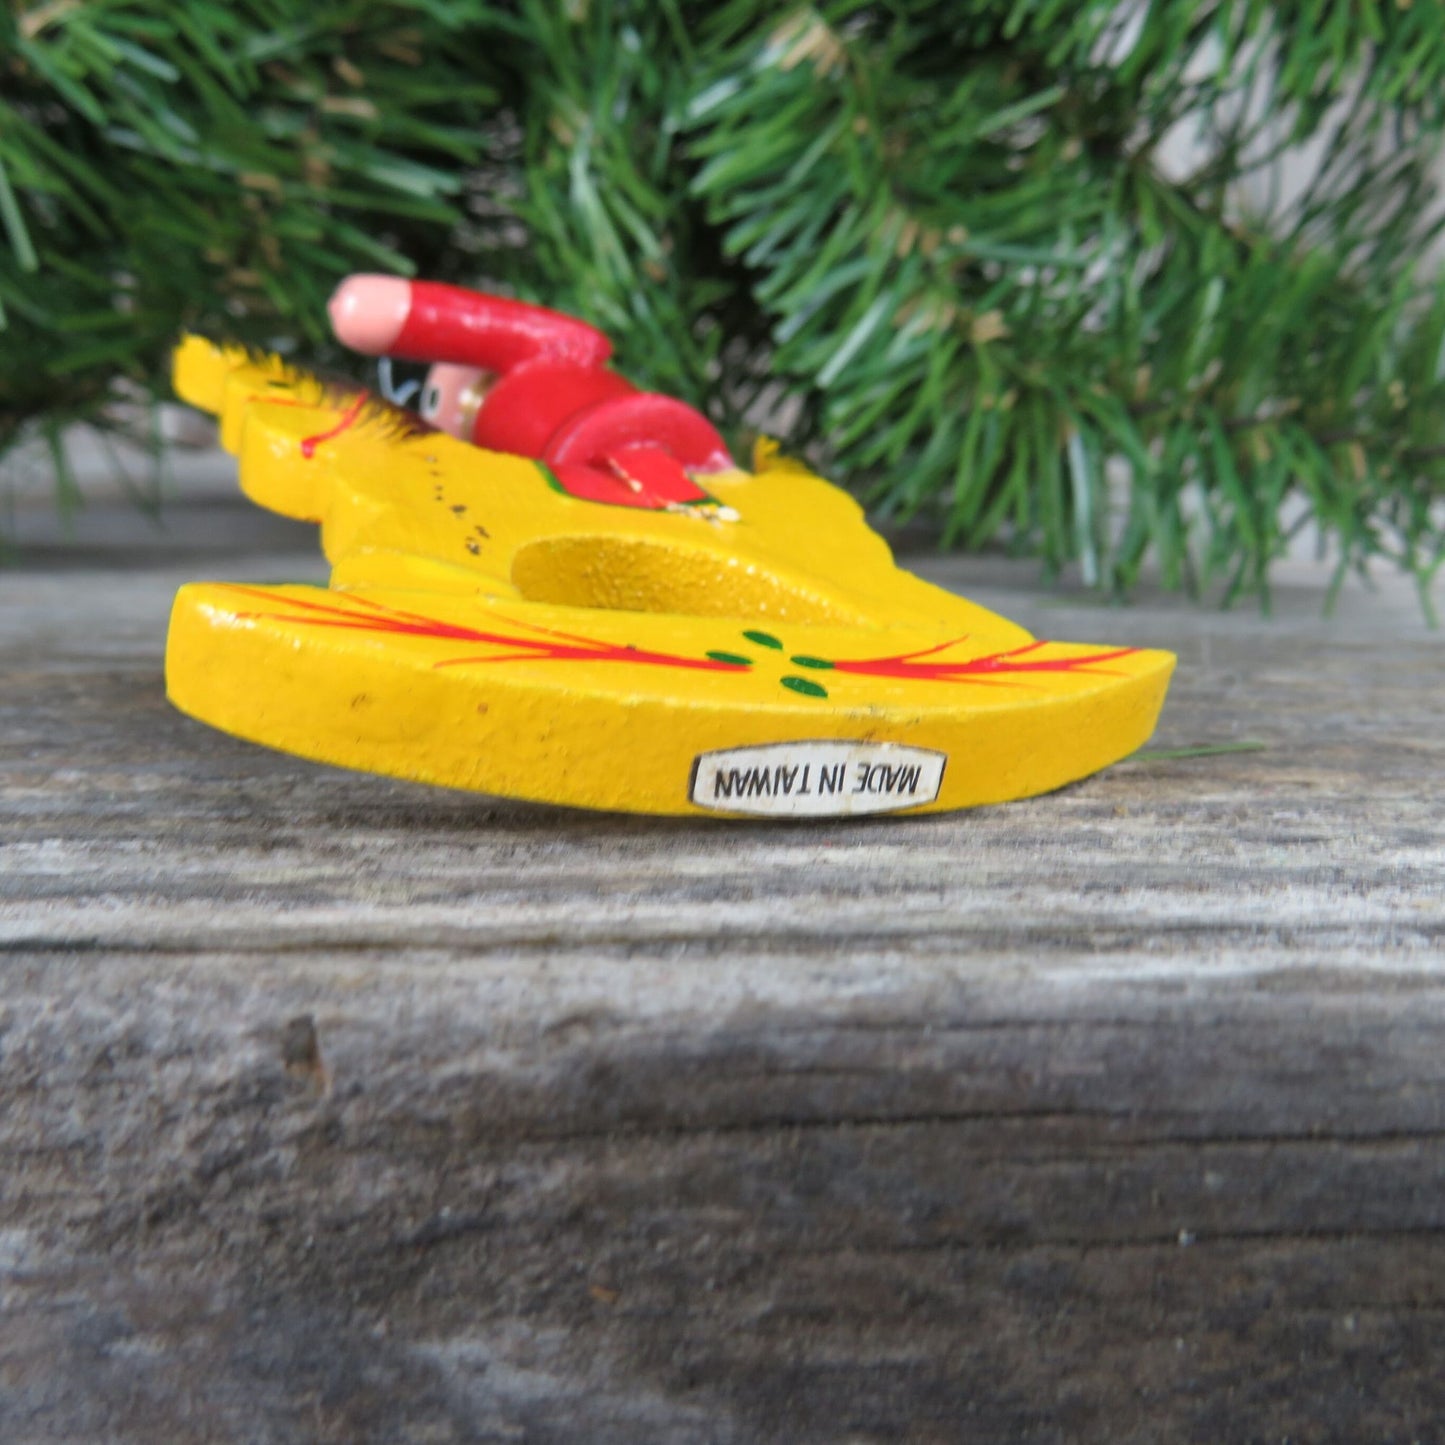 Vintage Soldier on Wooden Rocking Horse Ornament Yellow Toy Pony Red